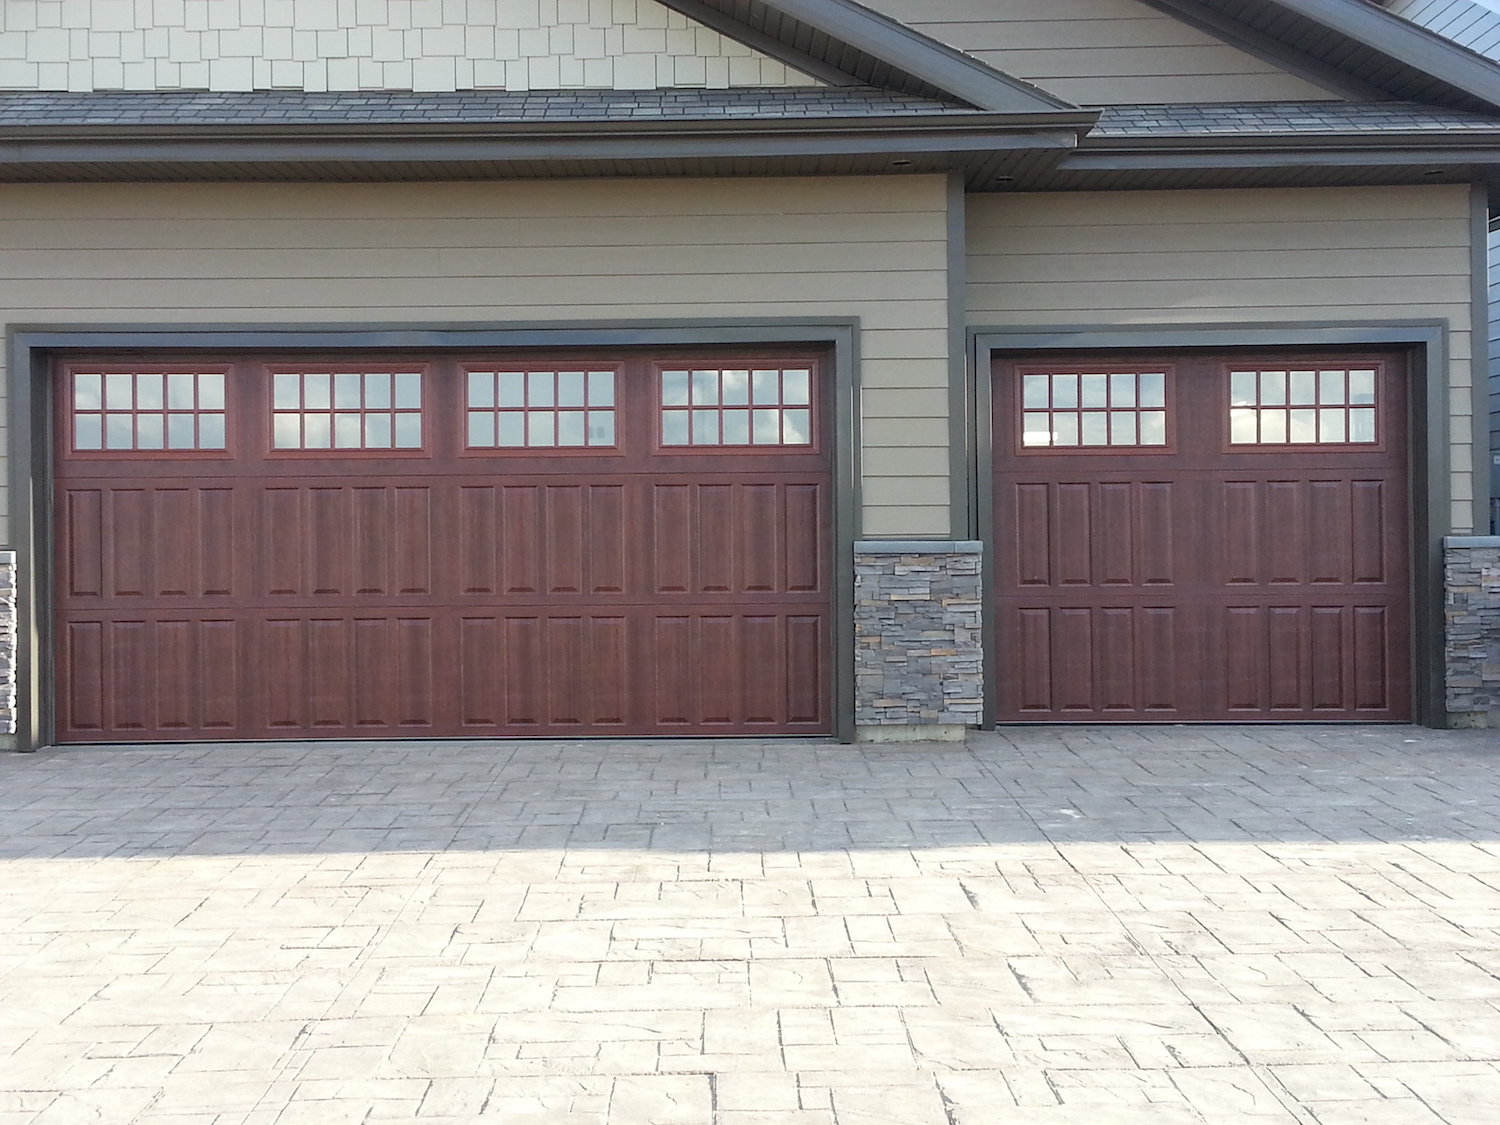 Creatice Garage Door For Sale In Halifax for Small Space